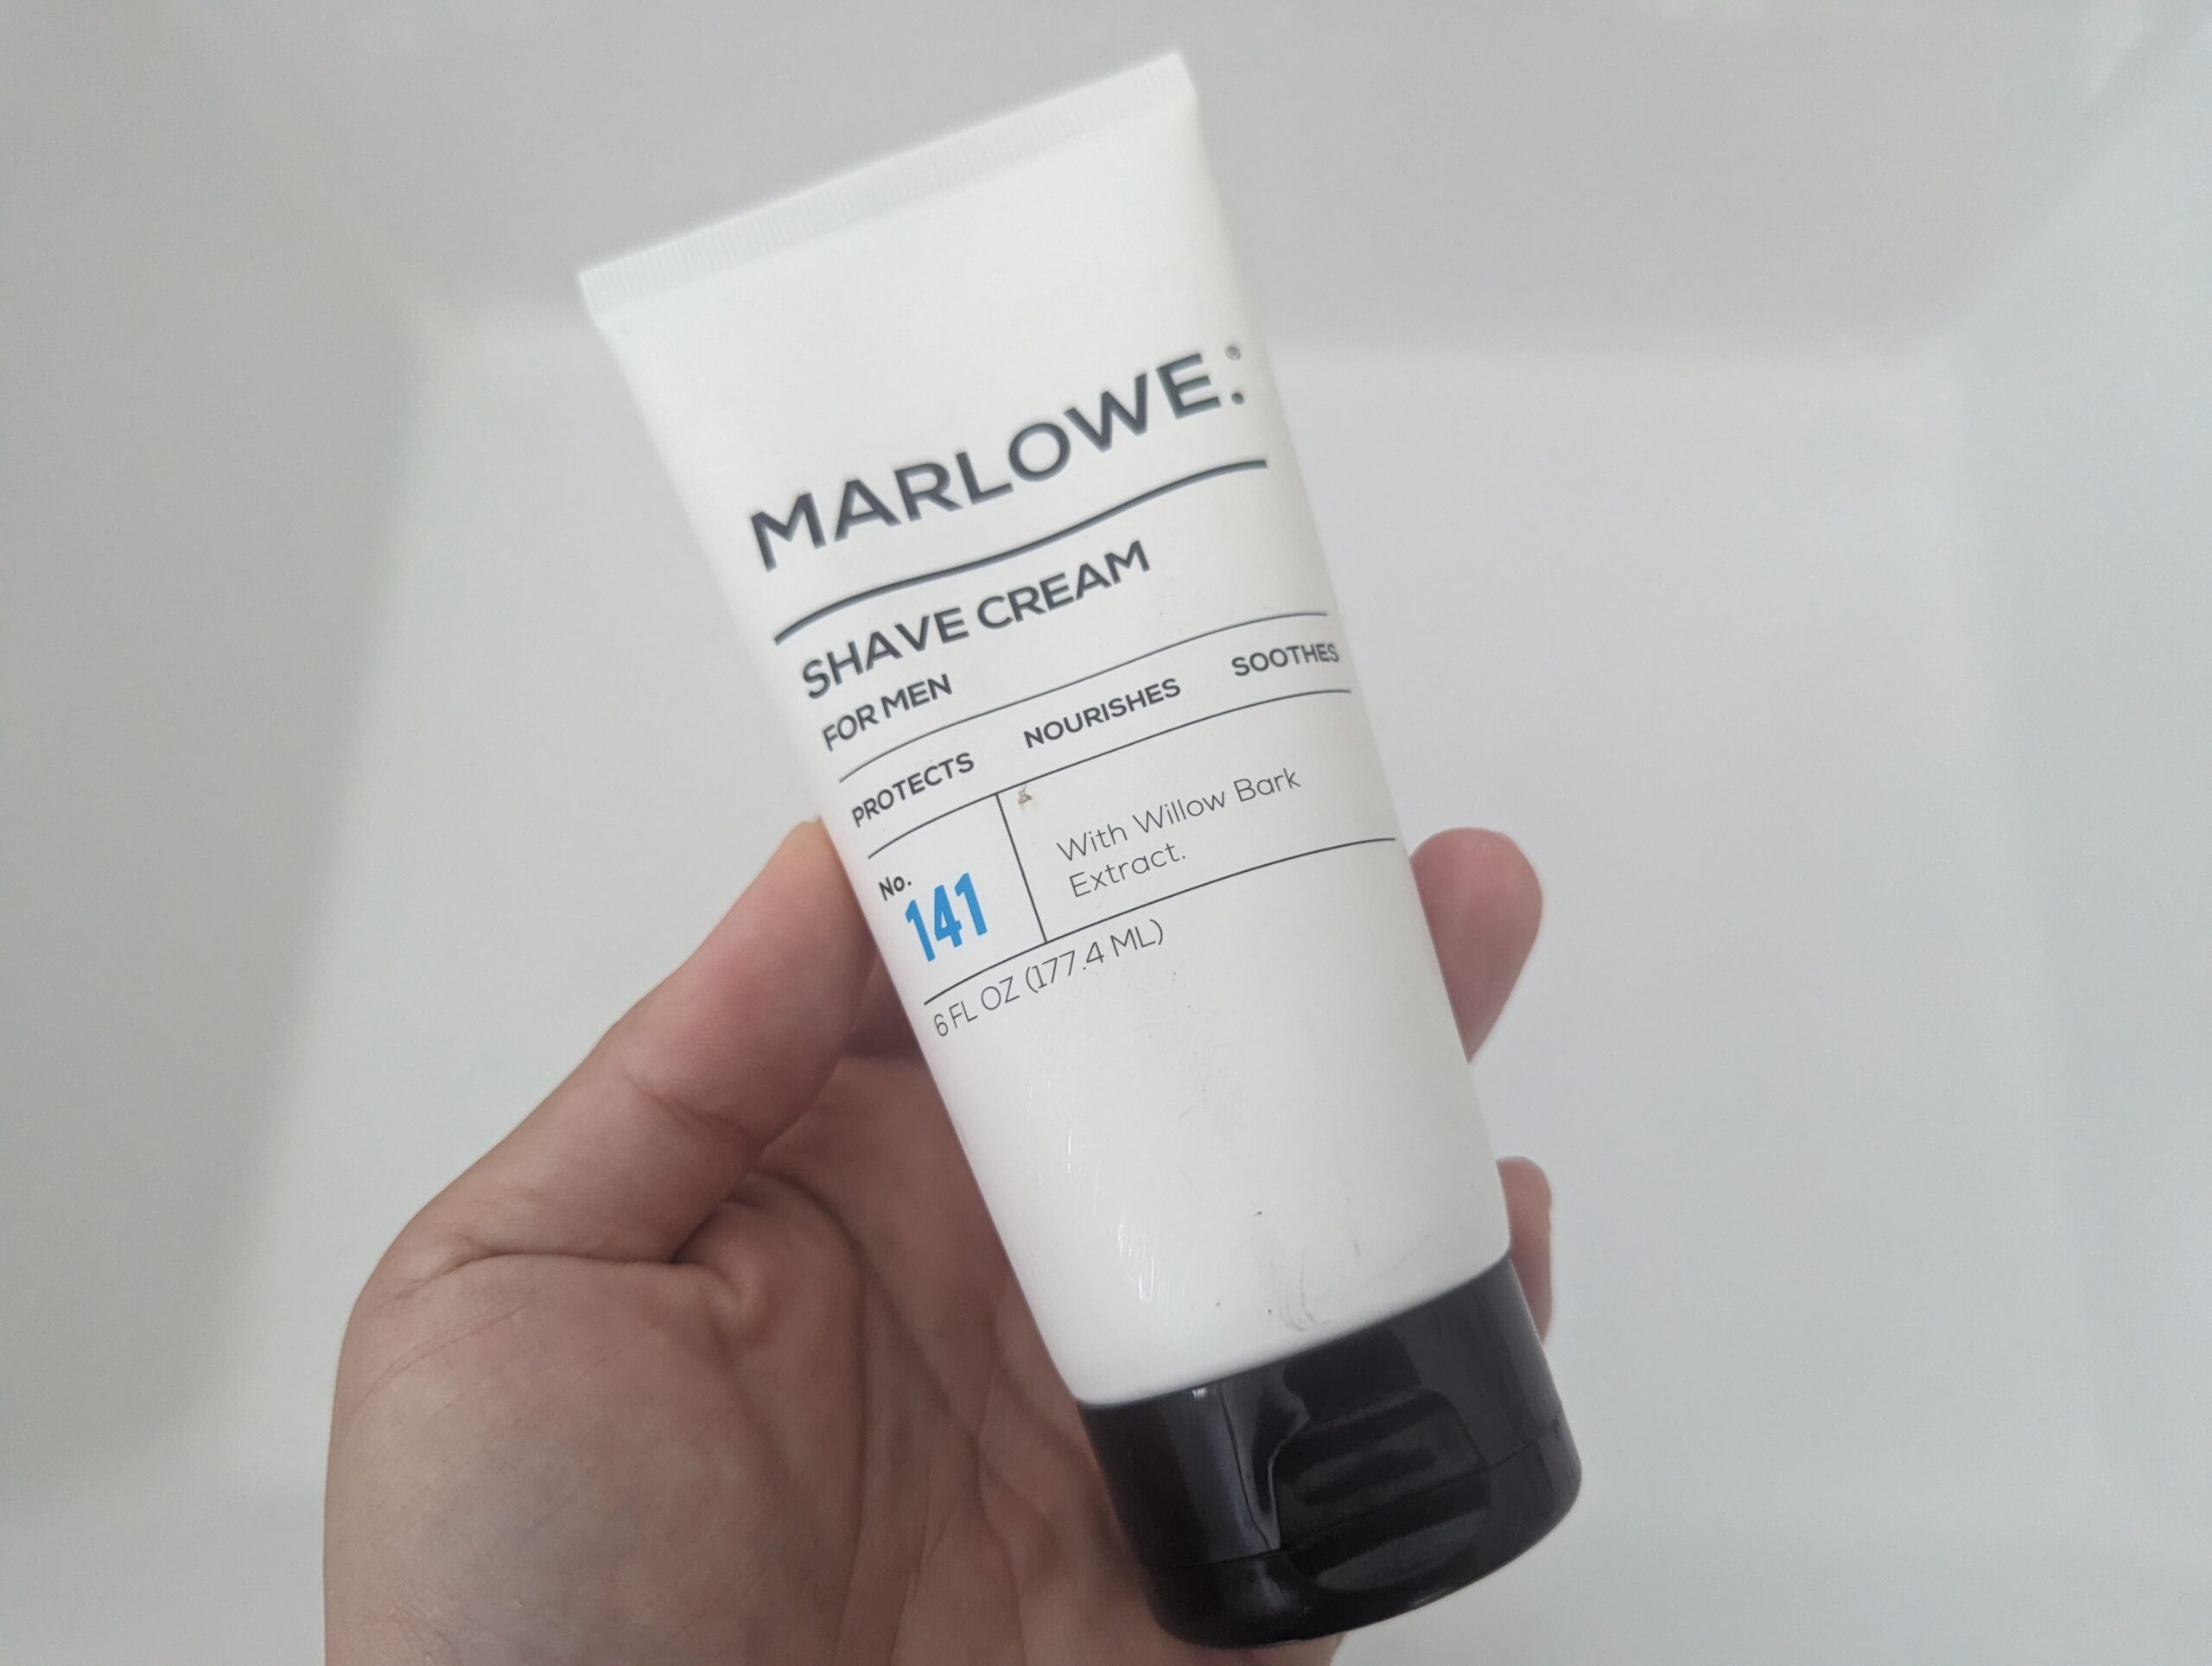 MARLOWE No. 141 Shave Cream Review: Your Ultimate Shaving Companion